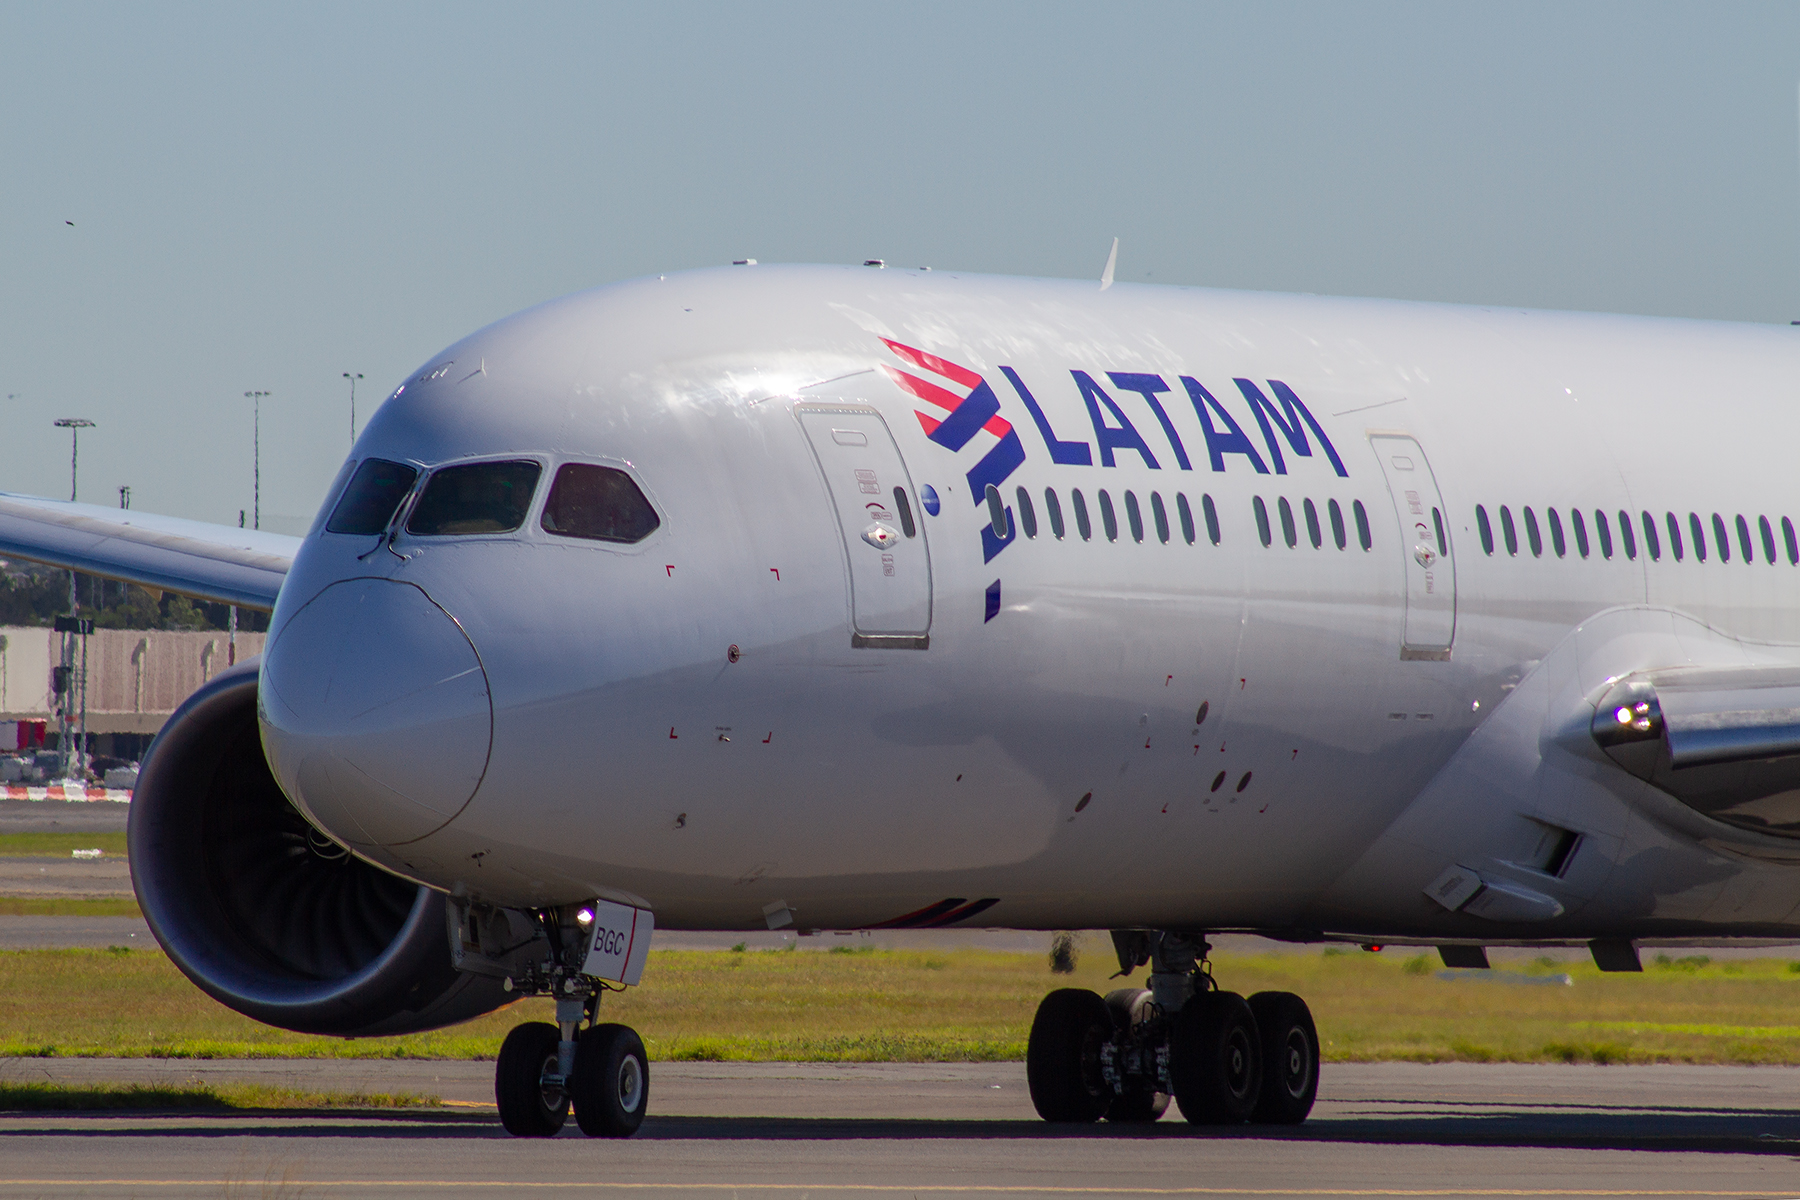 LAN Airlines Boeing 787-900 CC-BGC at Kingsford Smith